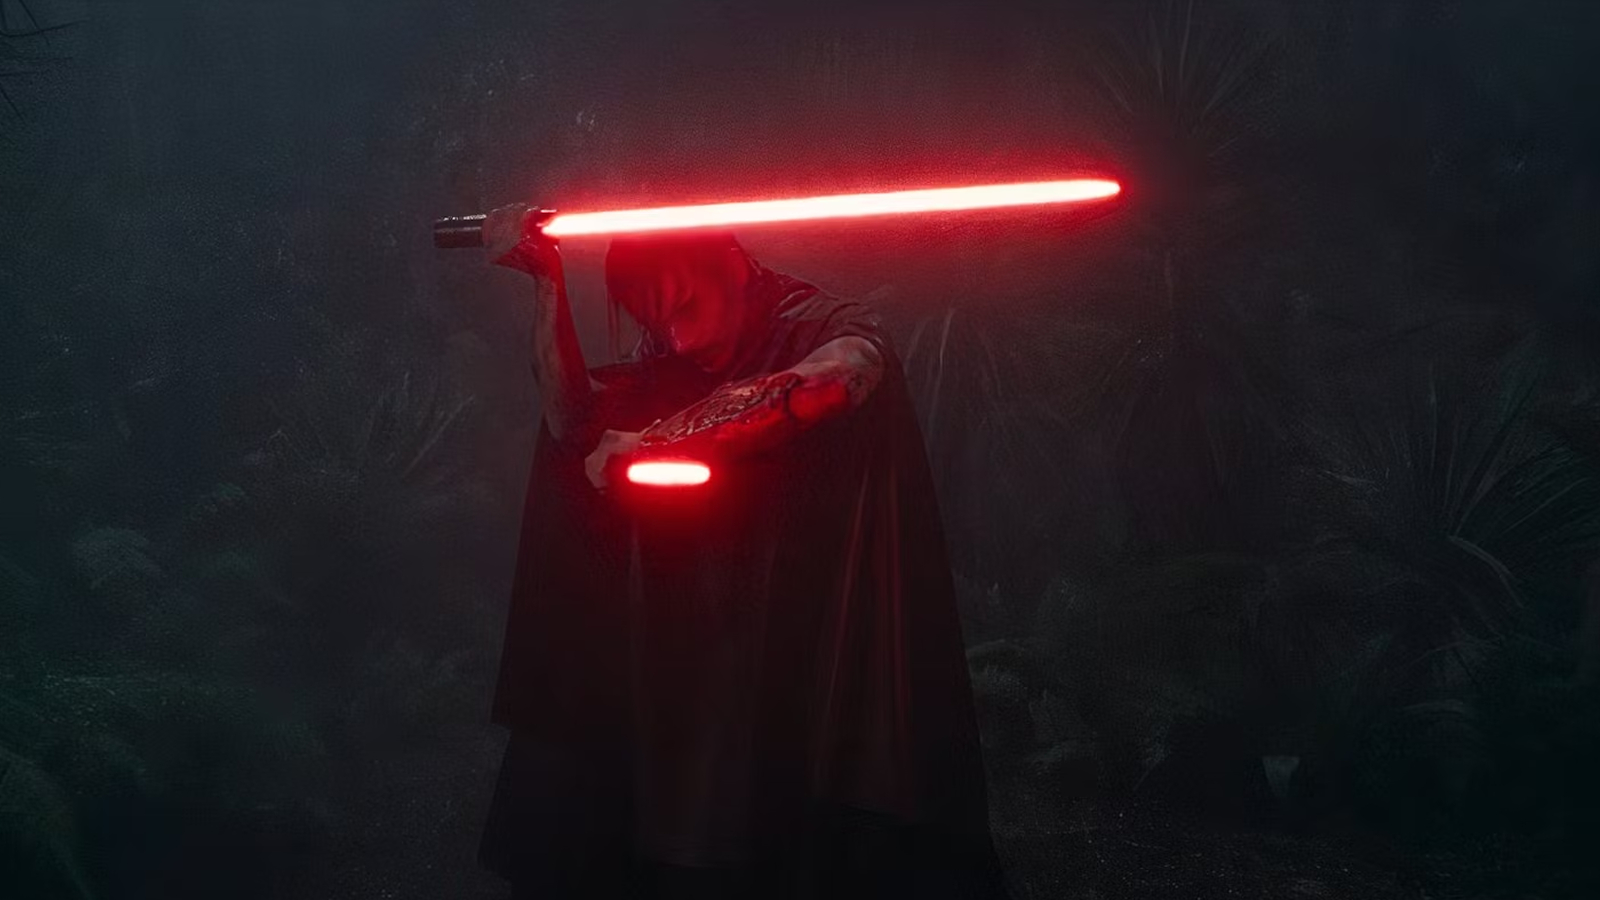 Qimir wielding twin red lightsabers in The Acolyte Season 1, Episode 5